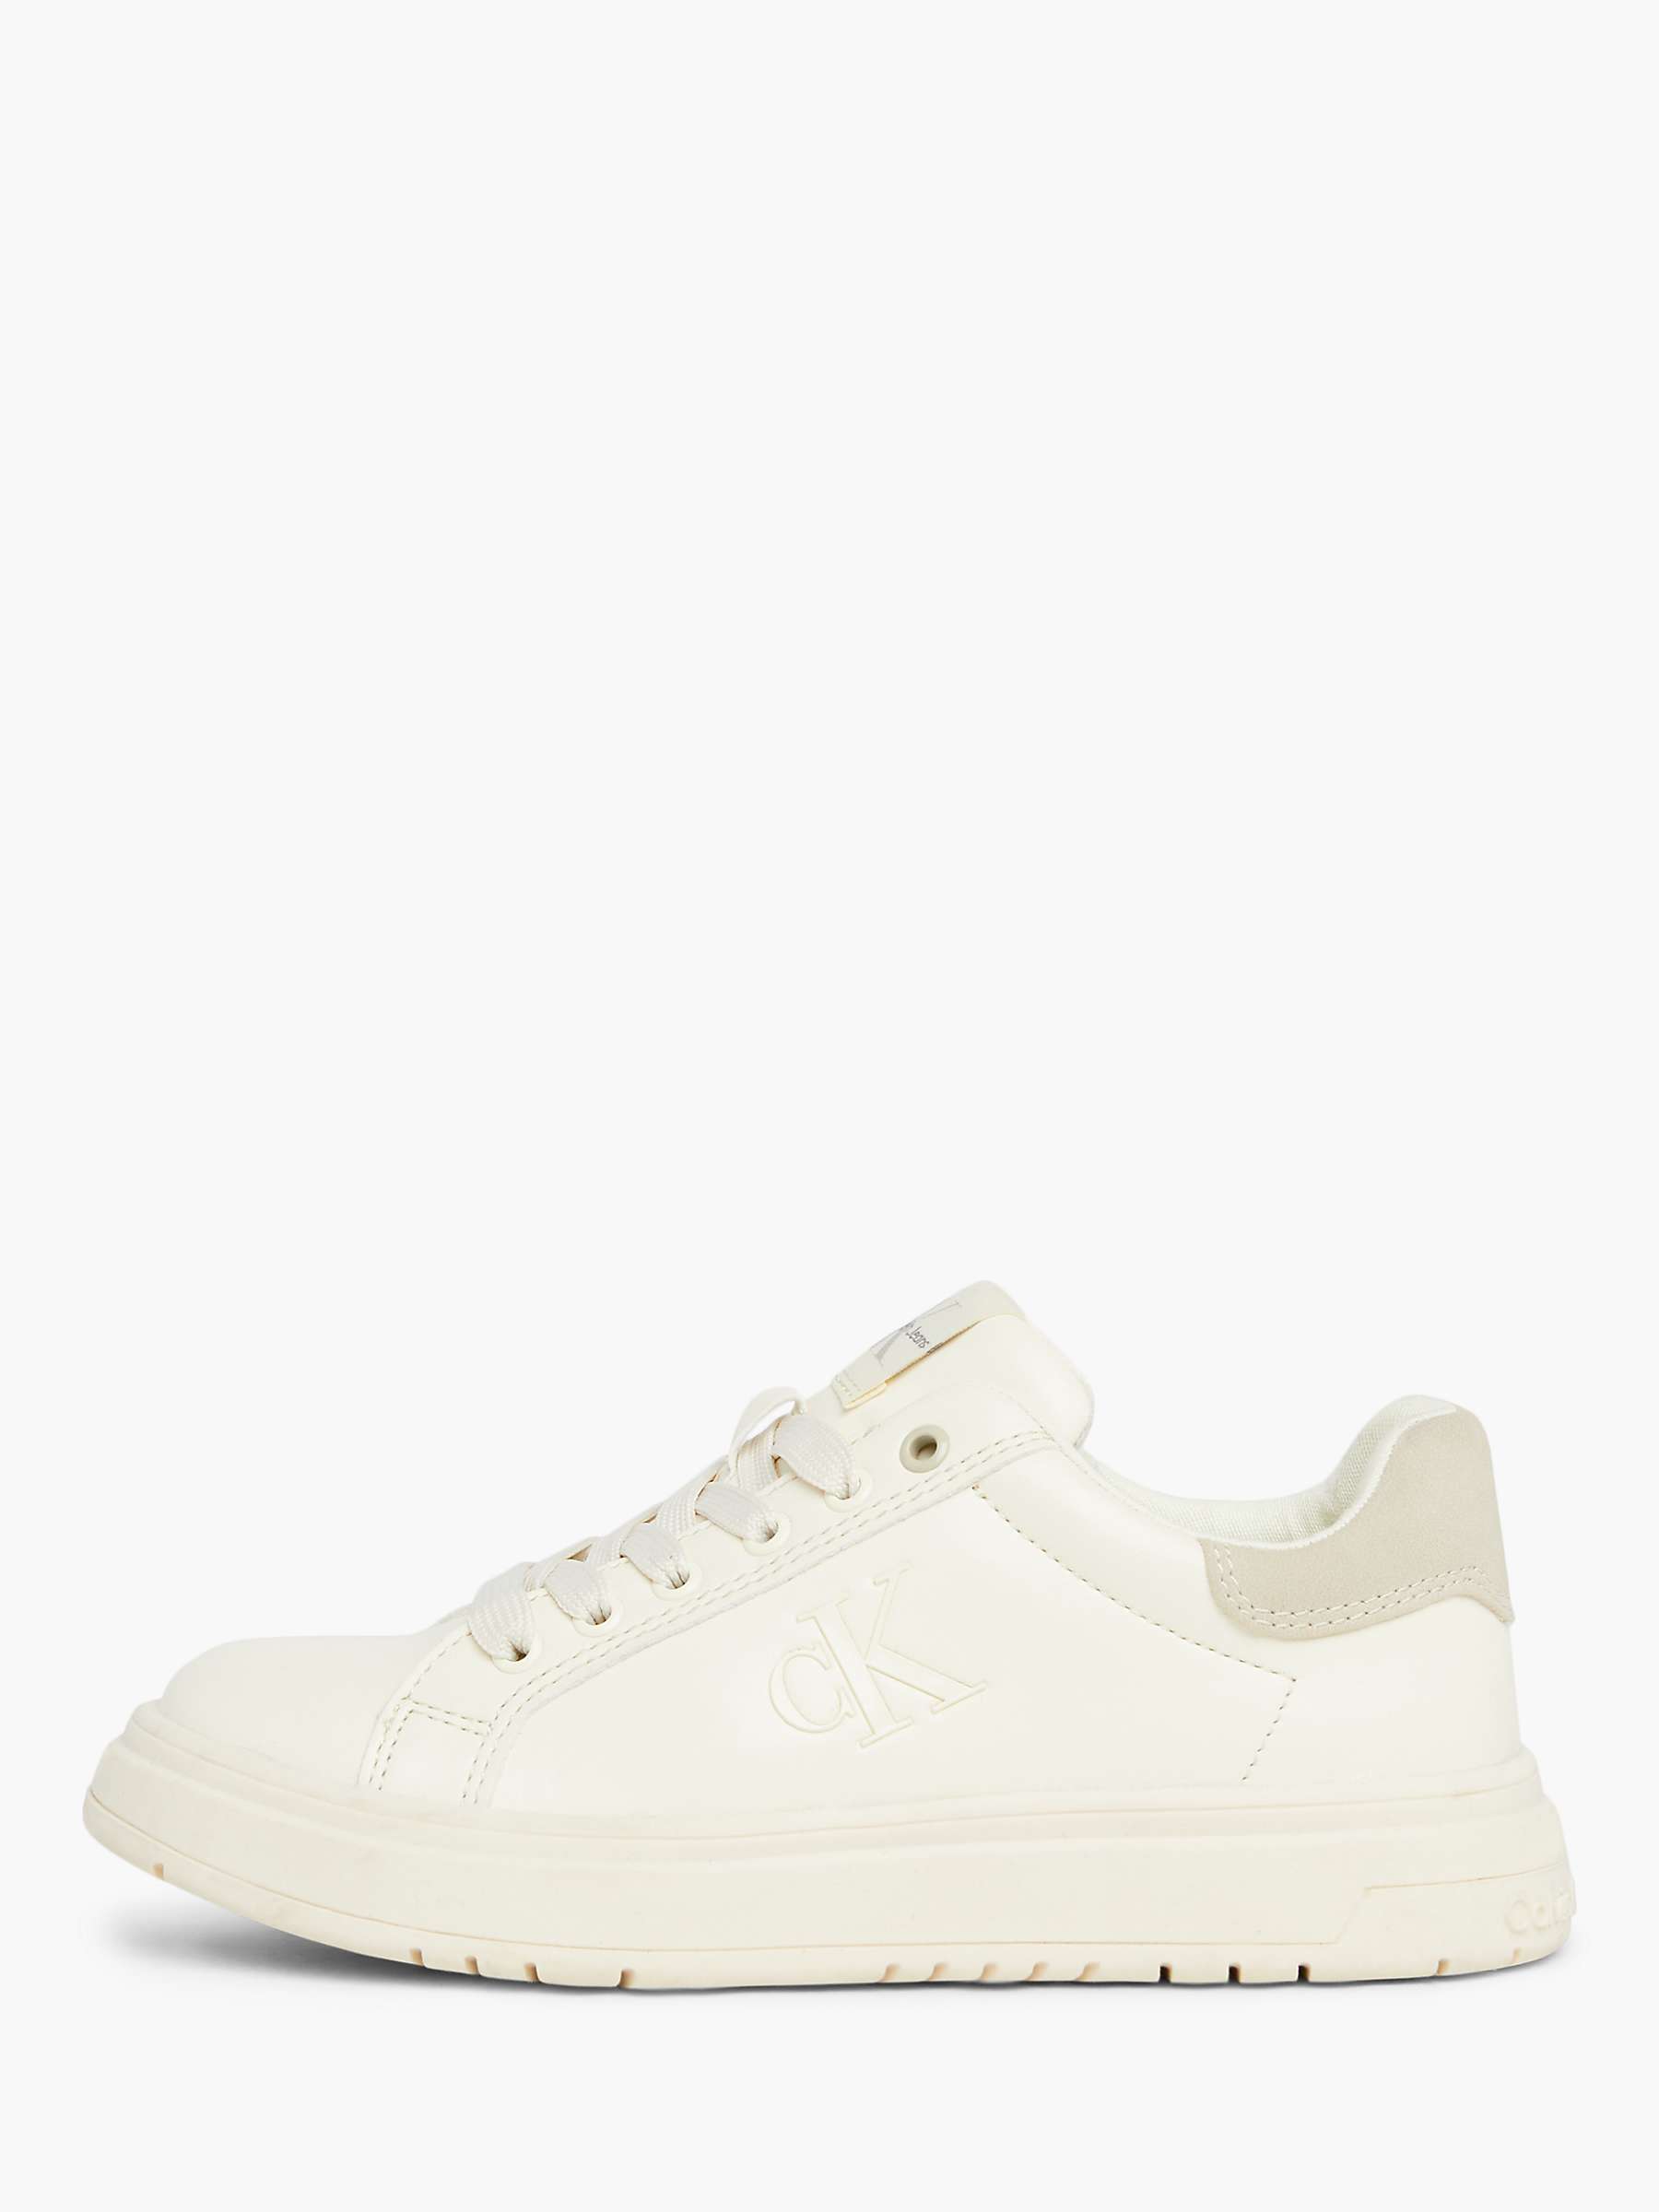 Calvin Klein Kids' CKJ Low Lace-Up Trainers, Ivory/Taupe at John Lewis ...